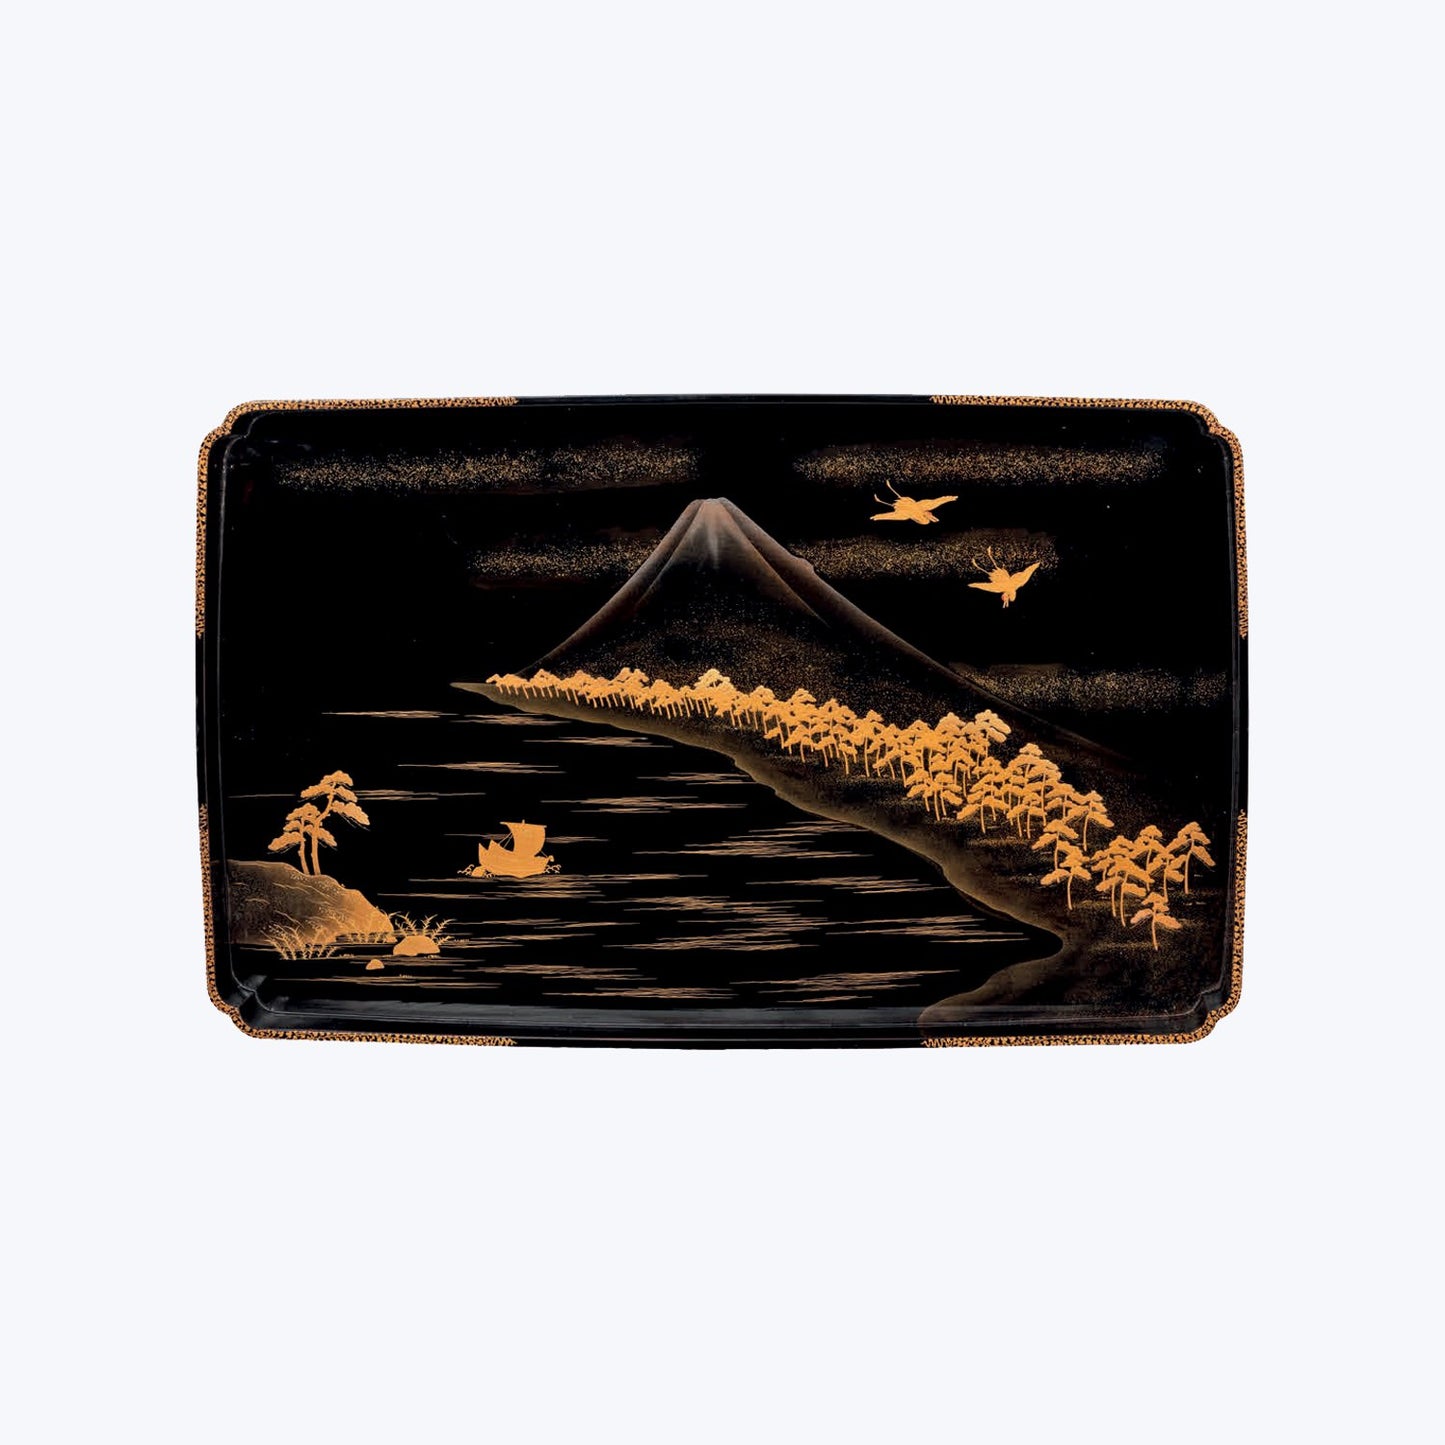 Japanese Lacquer Tray with Mount Fuji Motif